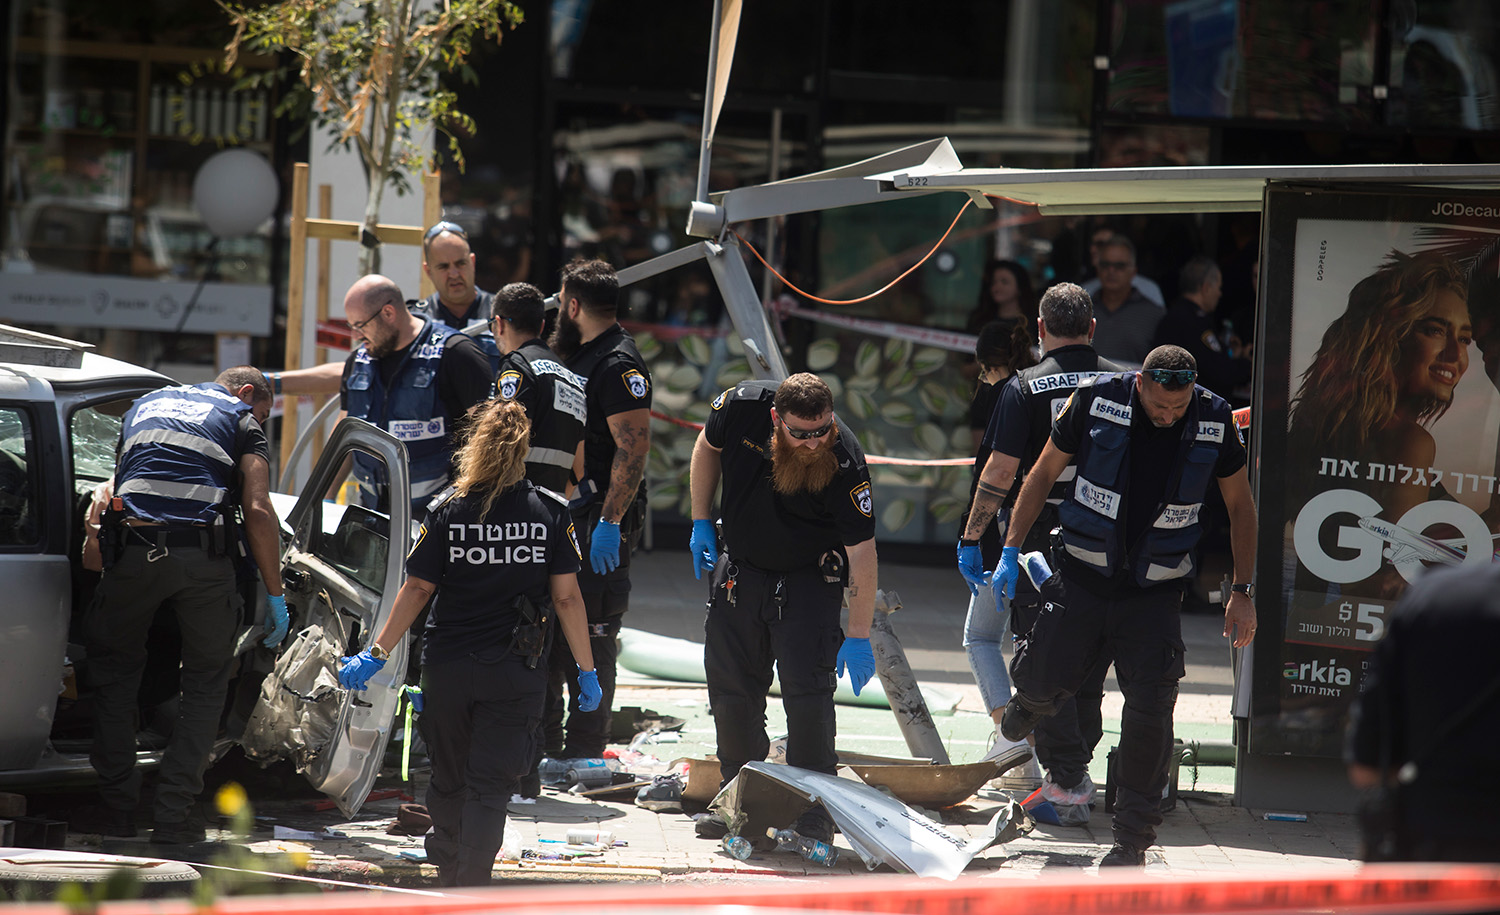 
Israeli emergency services at the scene of a terror attack on July 4, 2023 in Tel Aviv. Several people were injured after a car rammed into pedestrians and the driver then stabbed several people before being killed, according to Israeli officials. Amir Levy/Getty Images.






